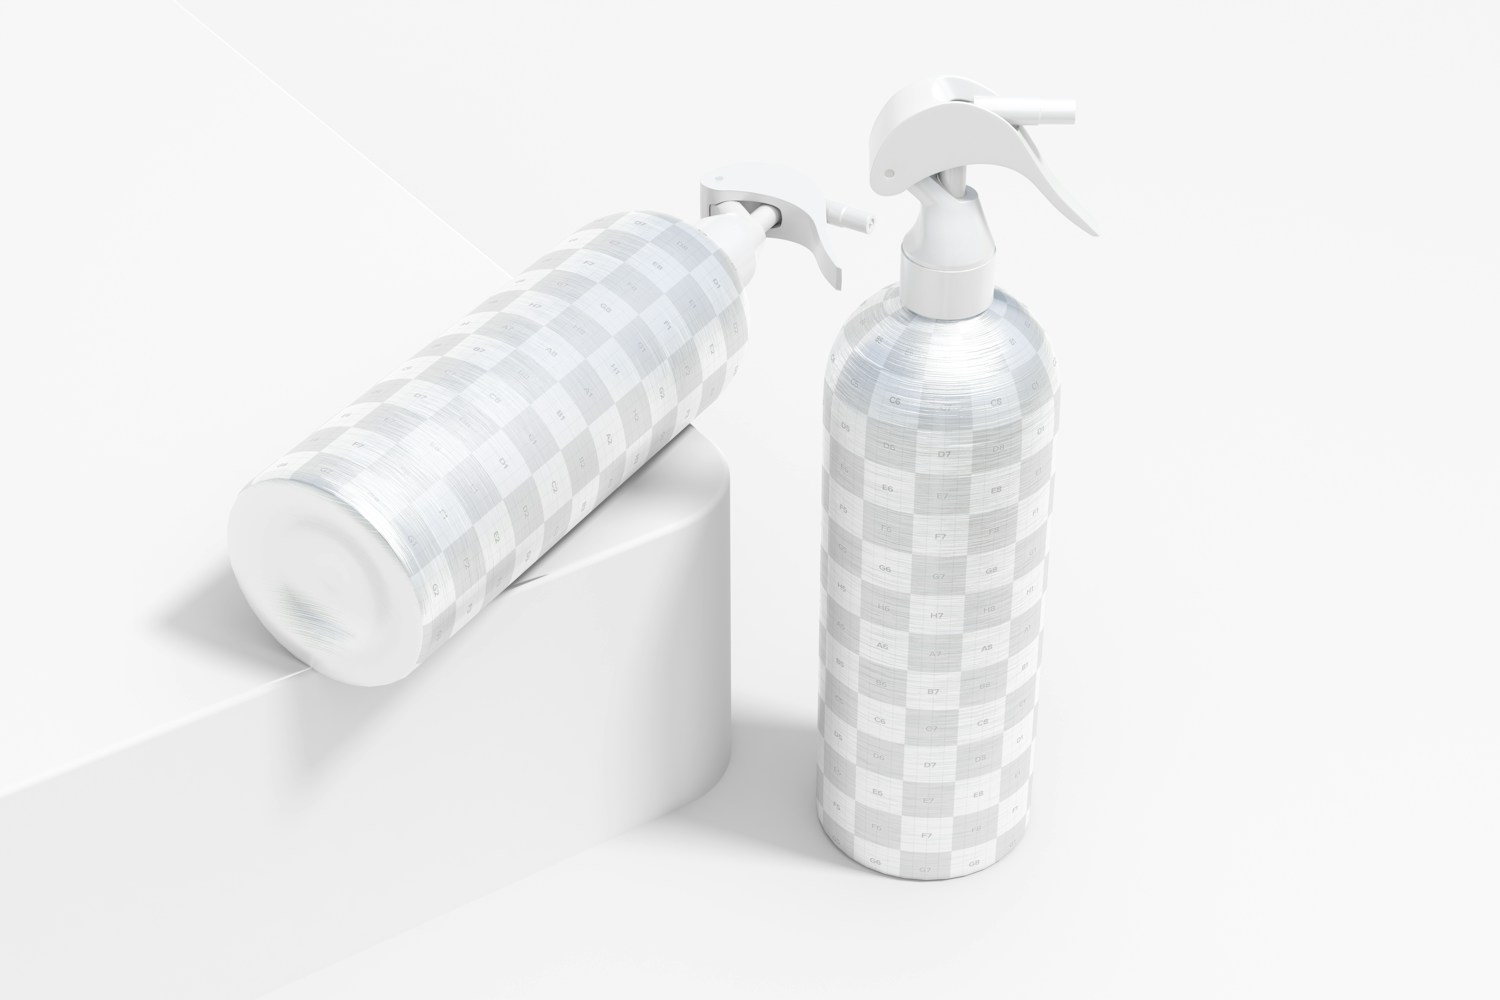 The grid is shown all the editable zones of the Metallic Spay Bottle.